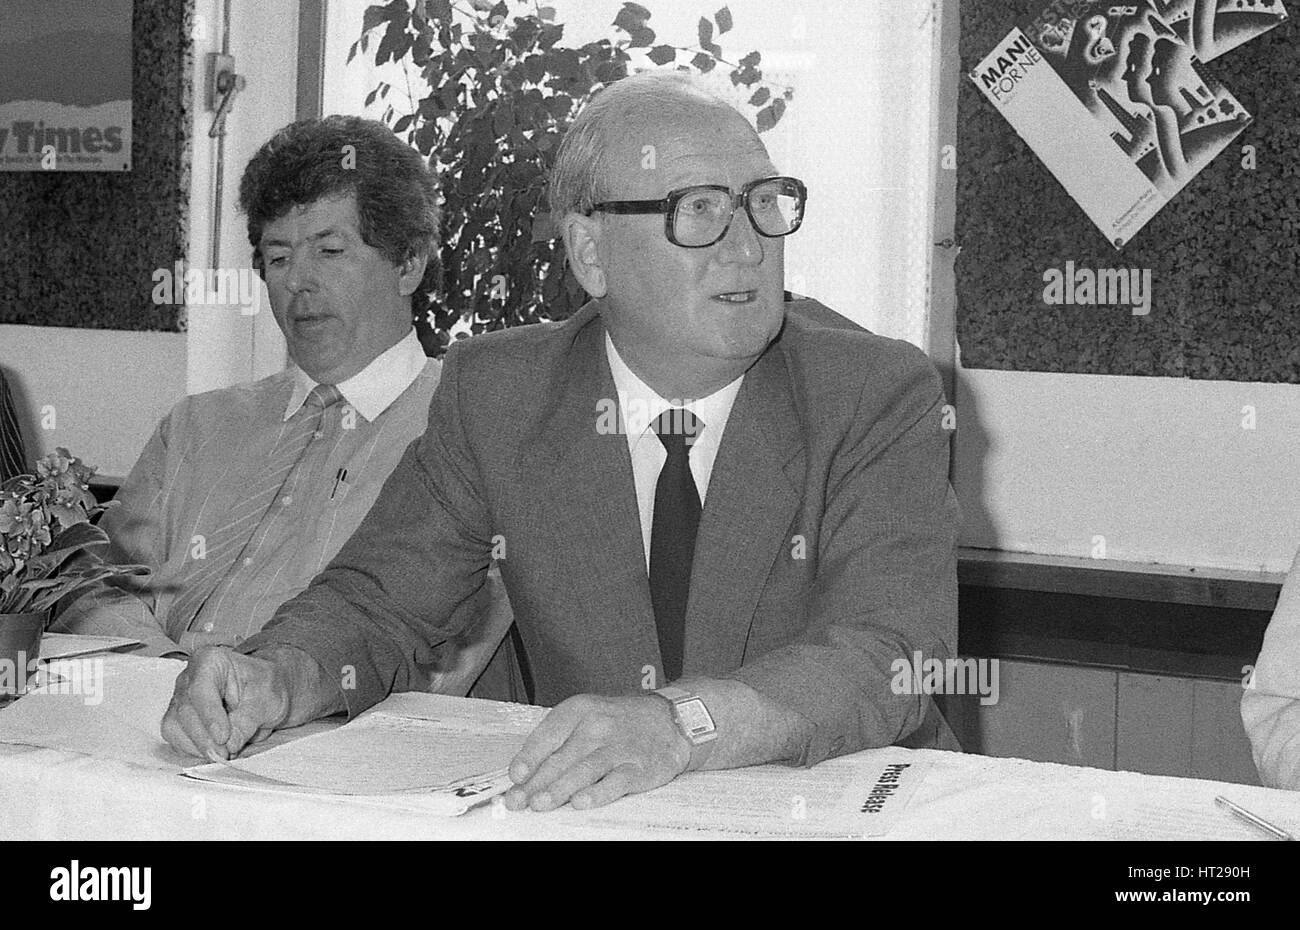 Gordon McClennan, General Secretary of the Communist Party of Great Britain, attends a press conference in London, England on May 30, 1989. Stock Photo